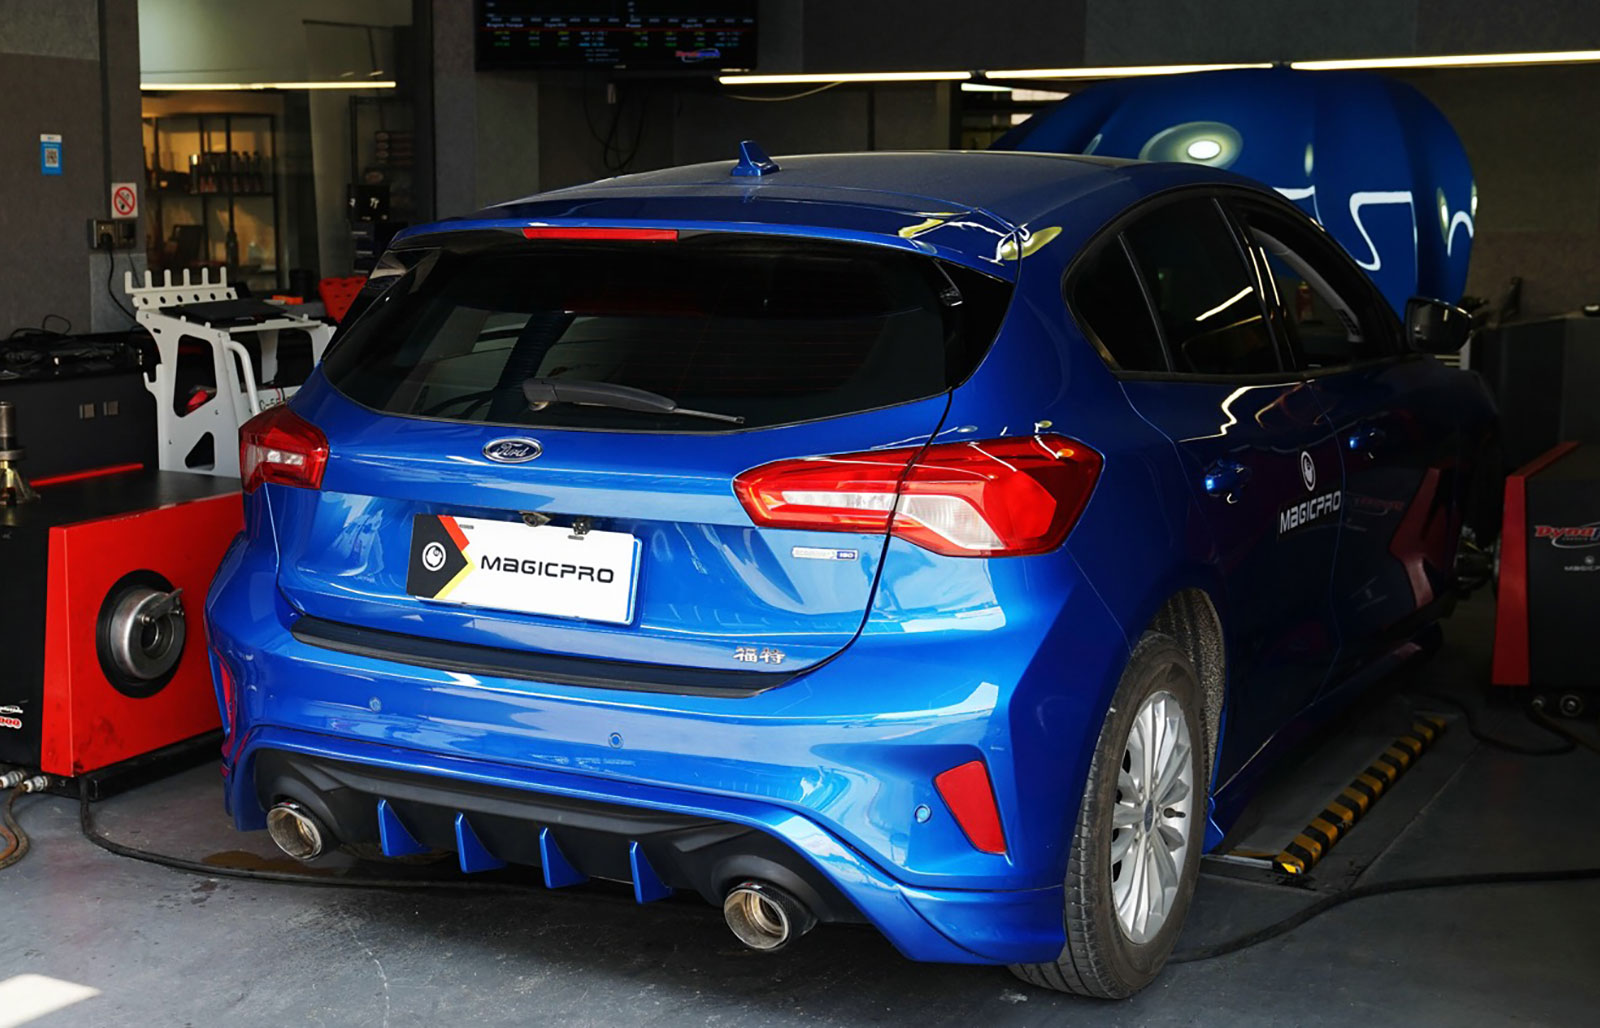 Ford Focus IV (2018) 1.5 EcoBoost tested at CPA